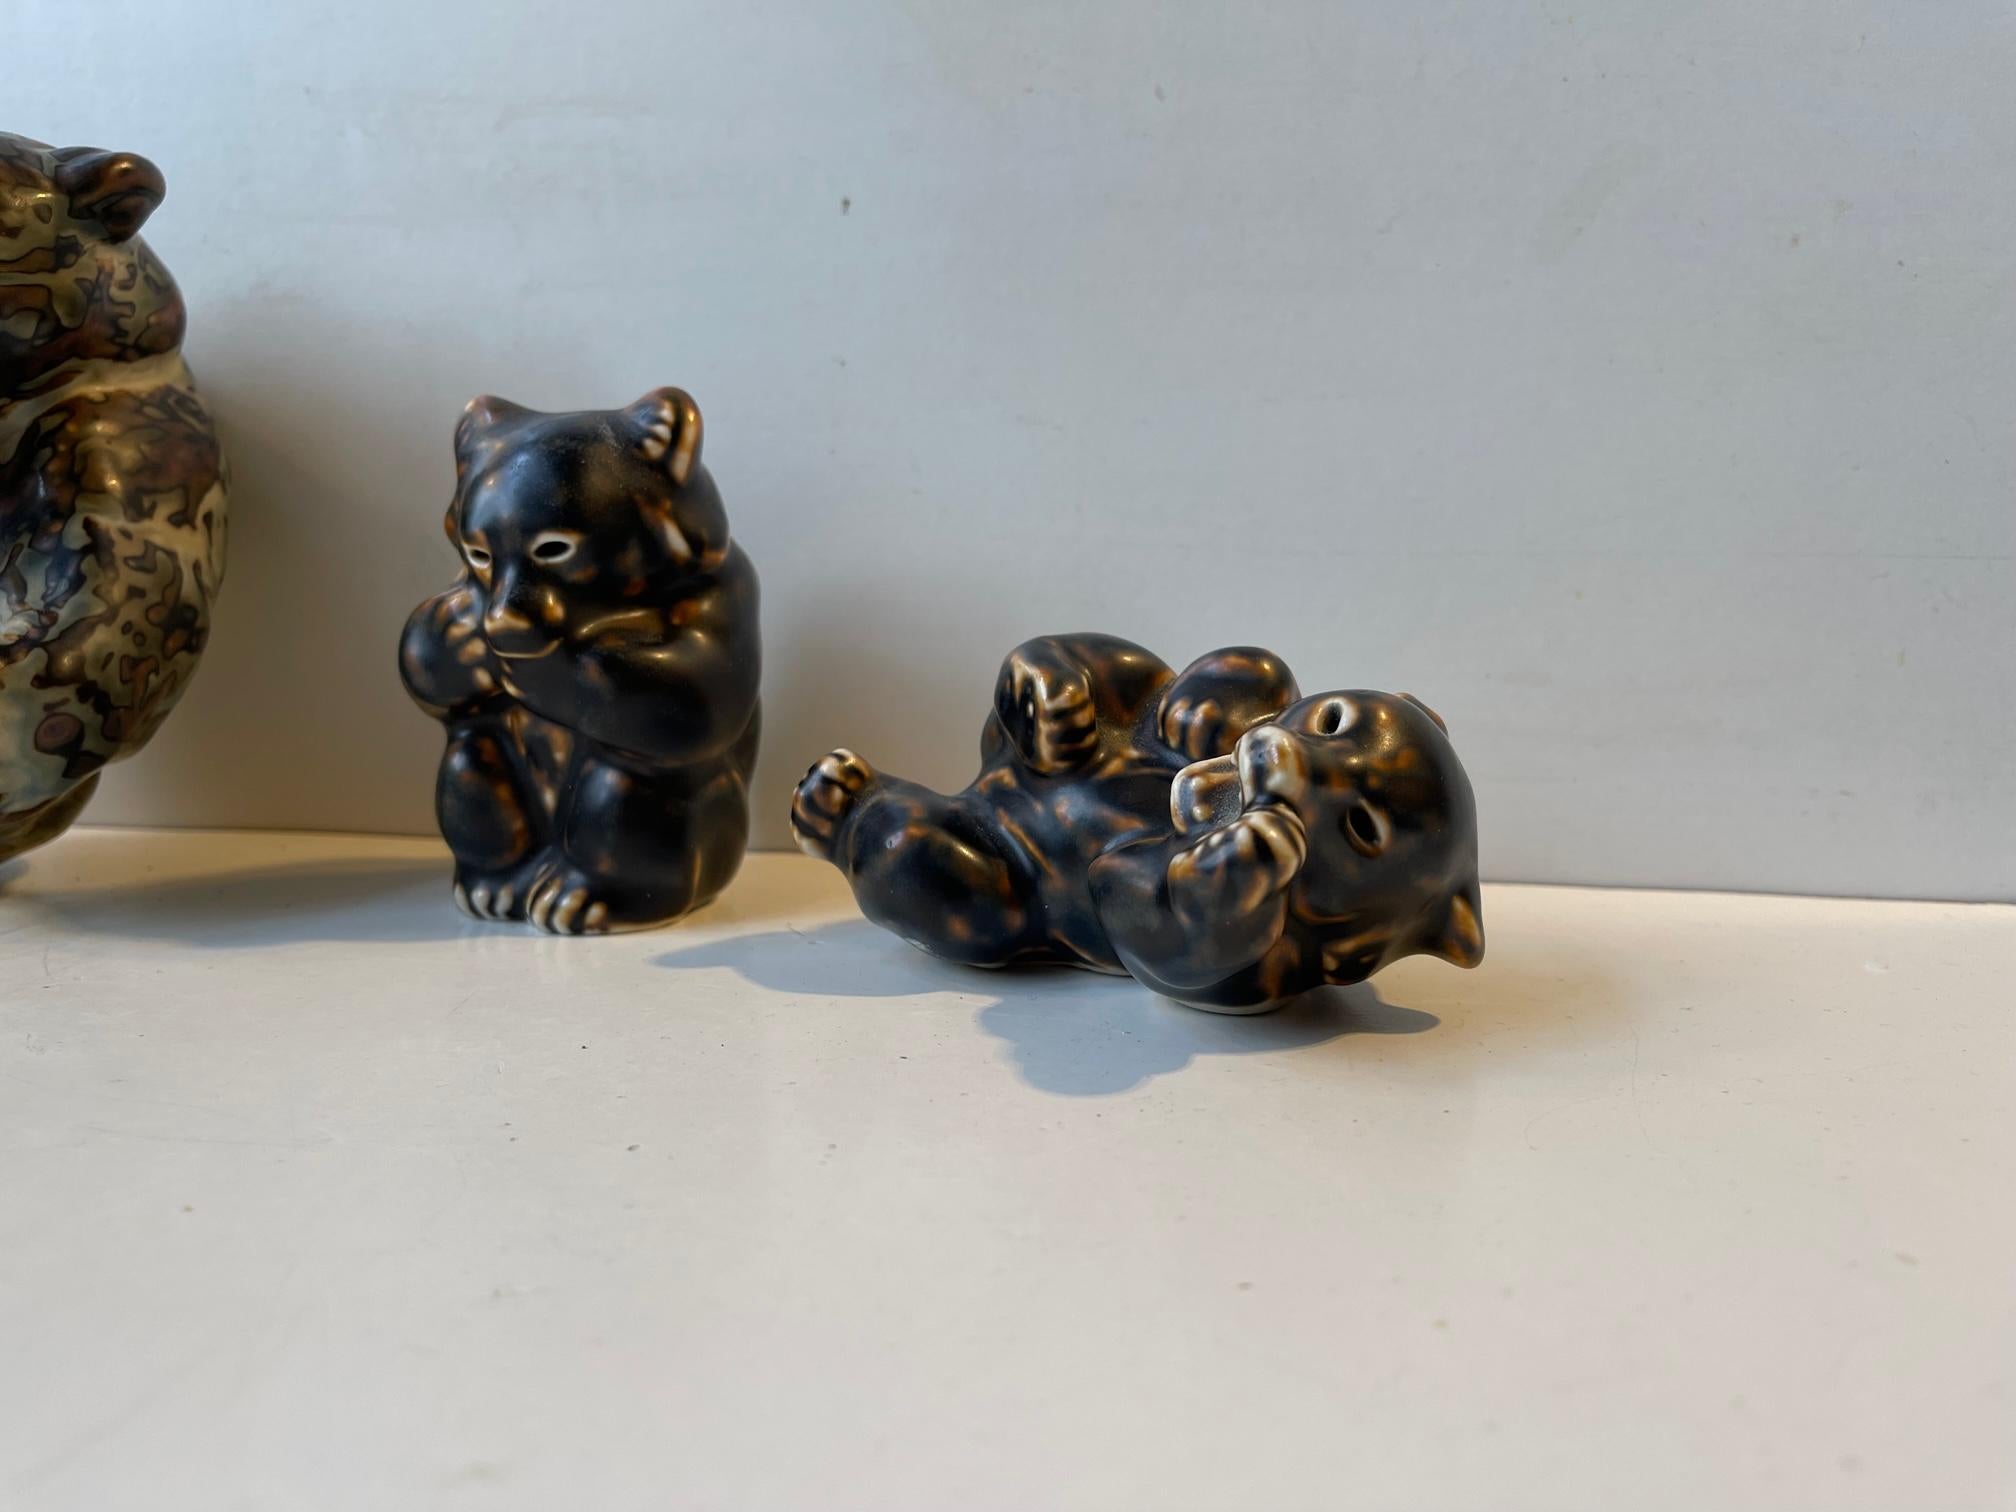 Mid-20th Century Royal Copenhagen Playing Bear Figurines in Glazed Stoneware by Knud Kyhn, 1950s